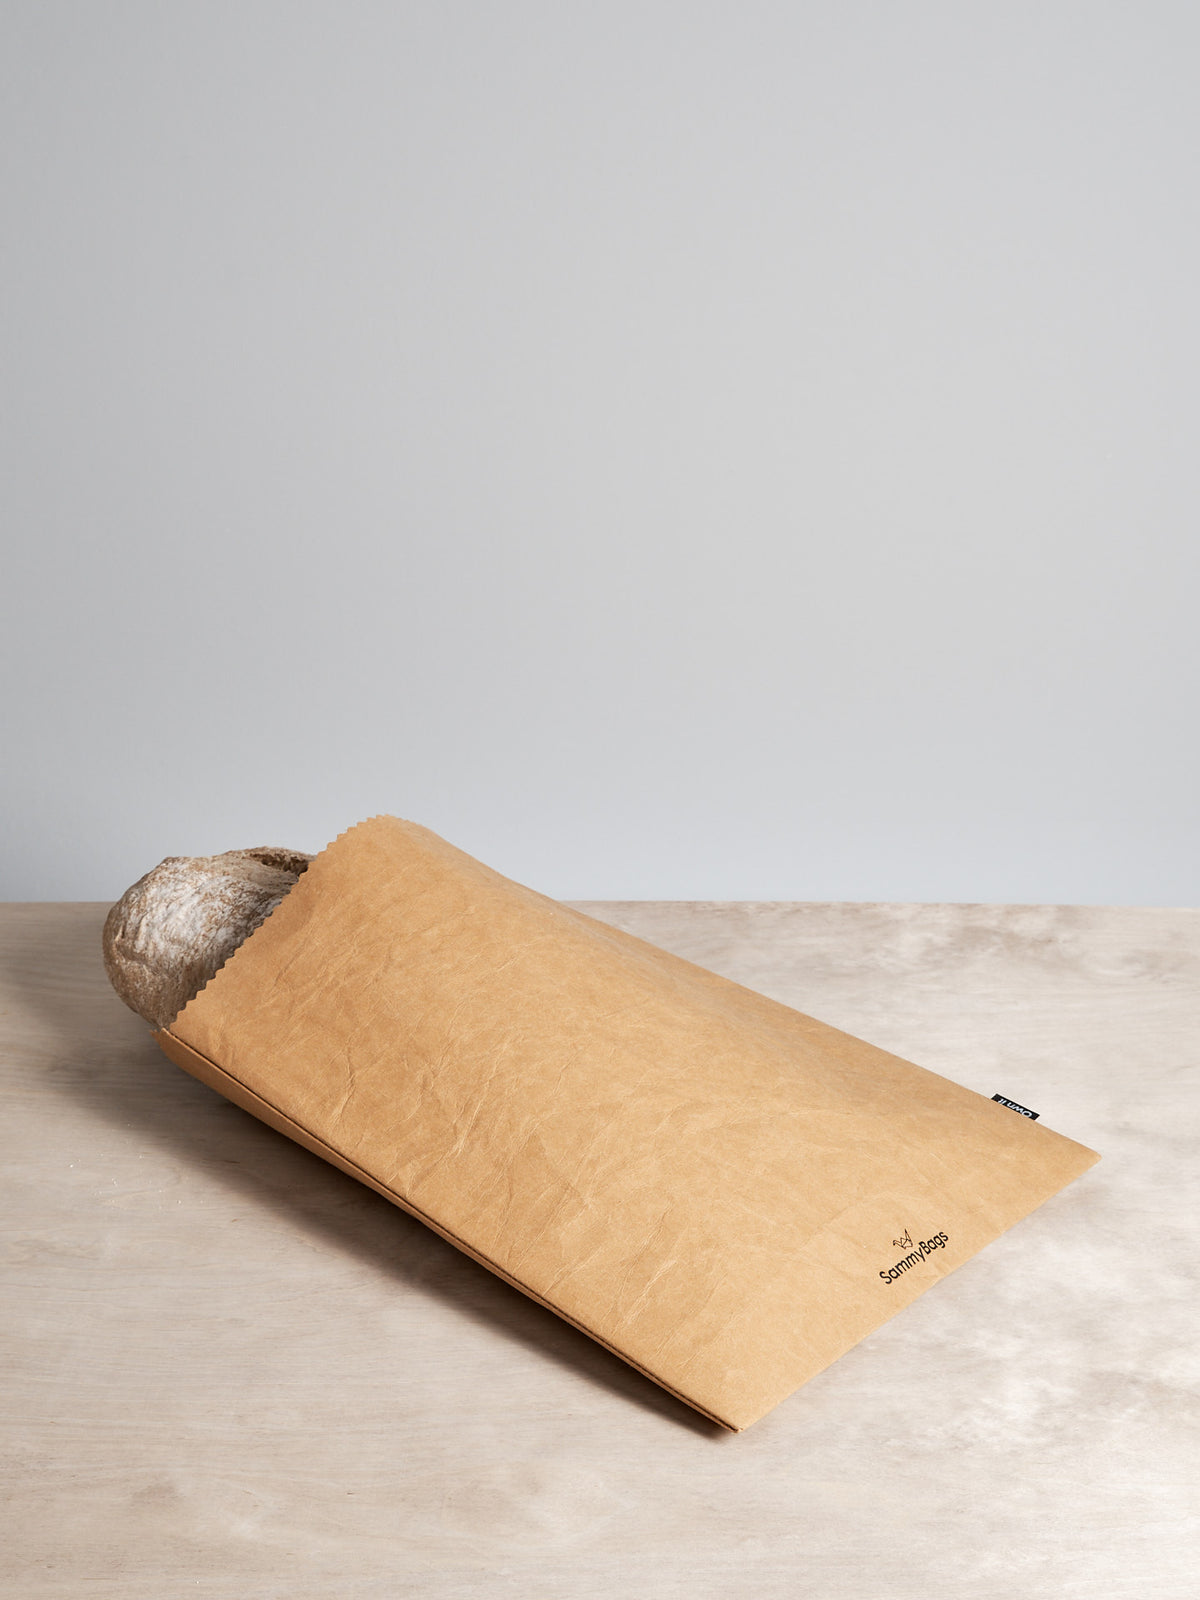 A Sammy Bags branded Reusable Flat Bag - XL sitting on top of a wooden table.